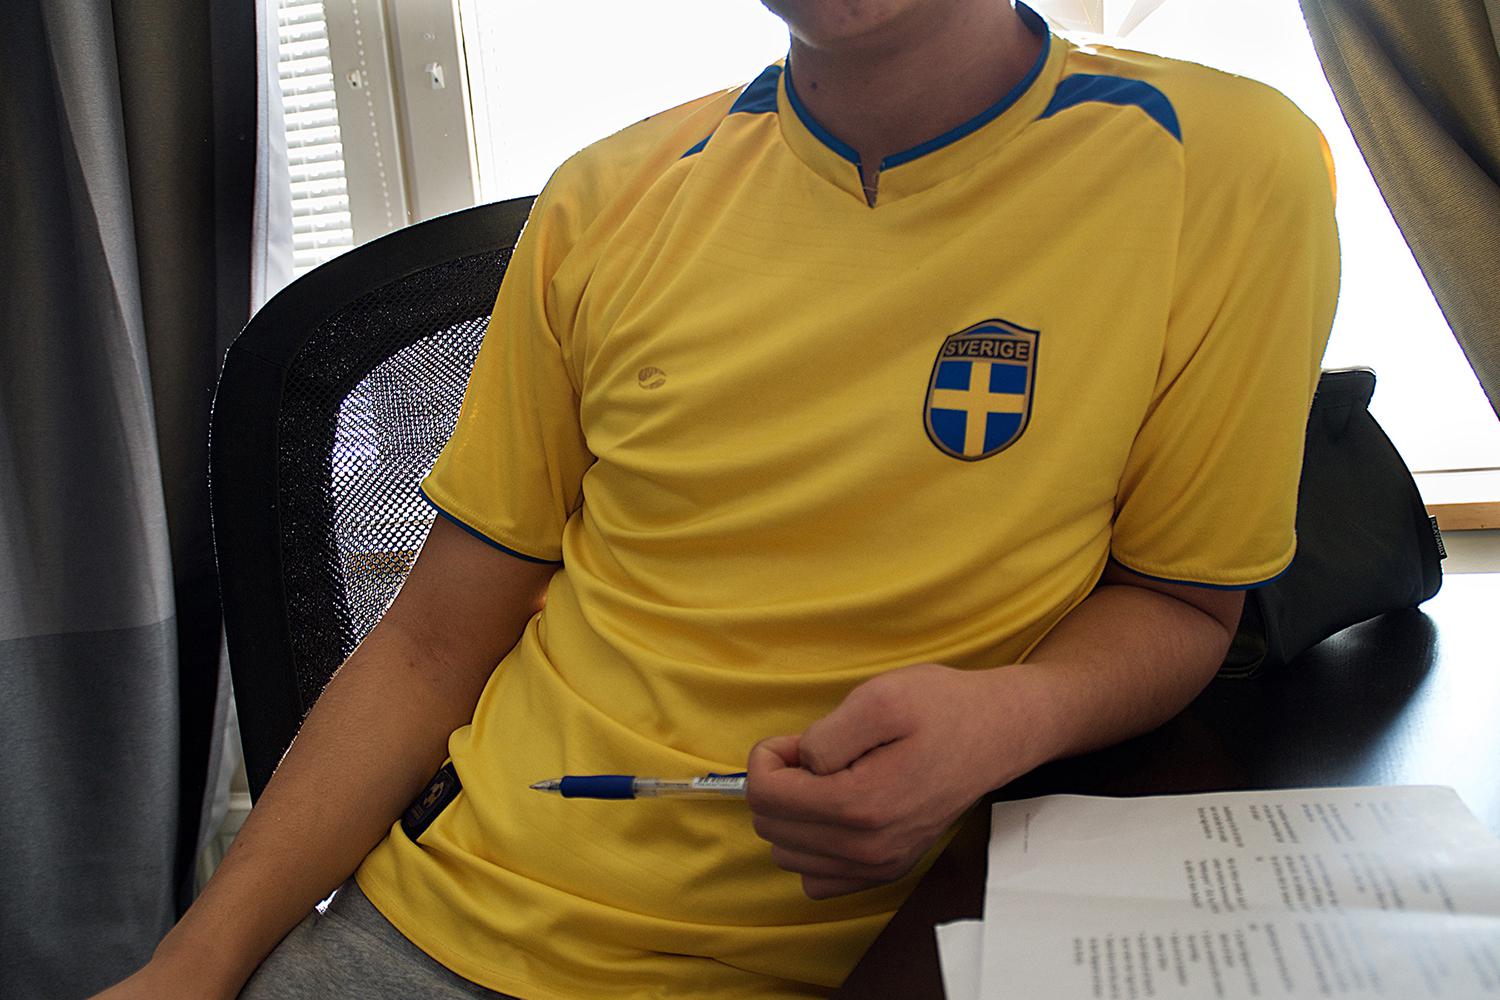 Wafa S., a 15-year-old boy from Afghanistan, doing his homework at a group home in Gothenburg, Sweden. He wants to continue his education but he told Human Rights Watch the long asylum process sometimes discourages him as he doesn't know what his future h